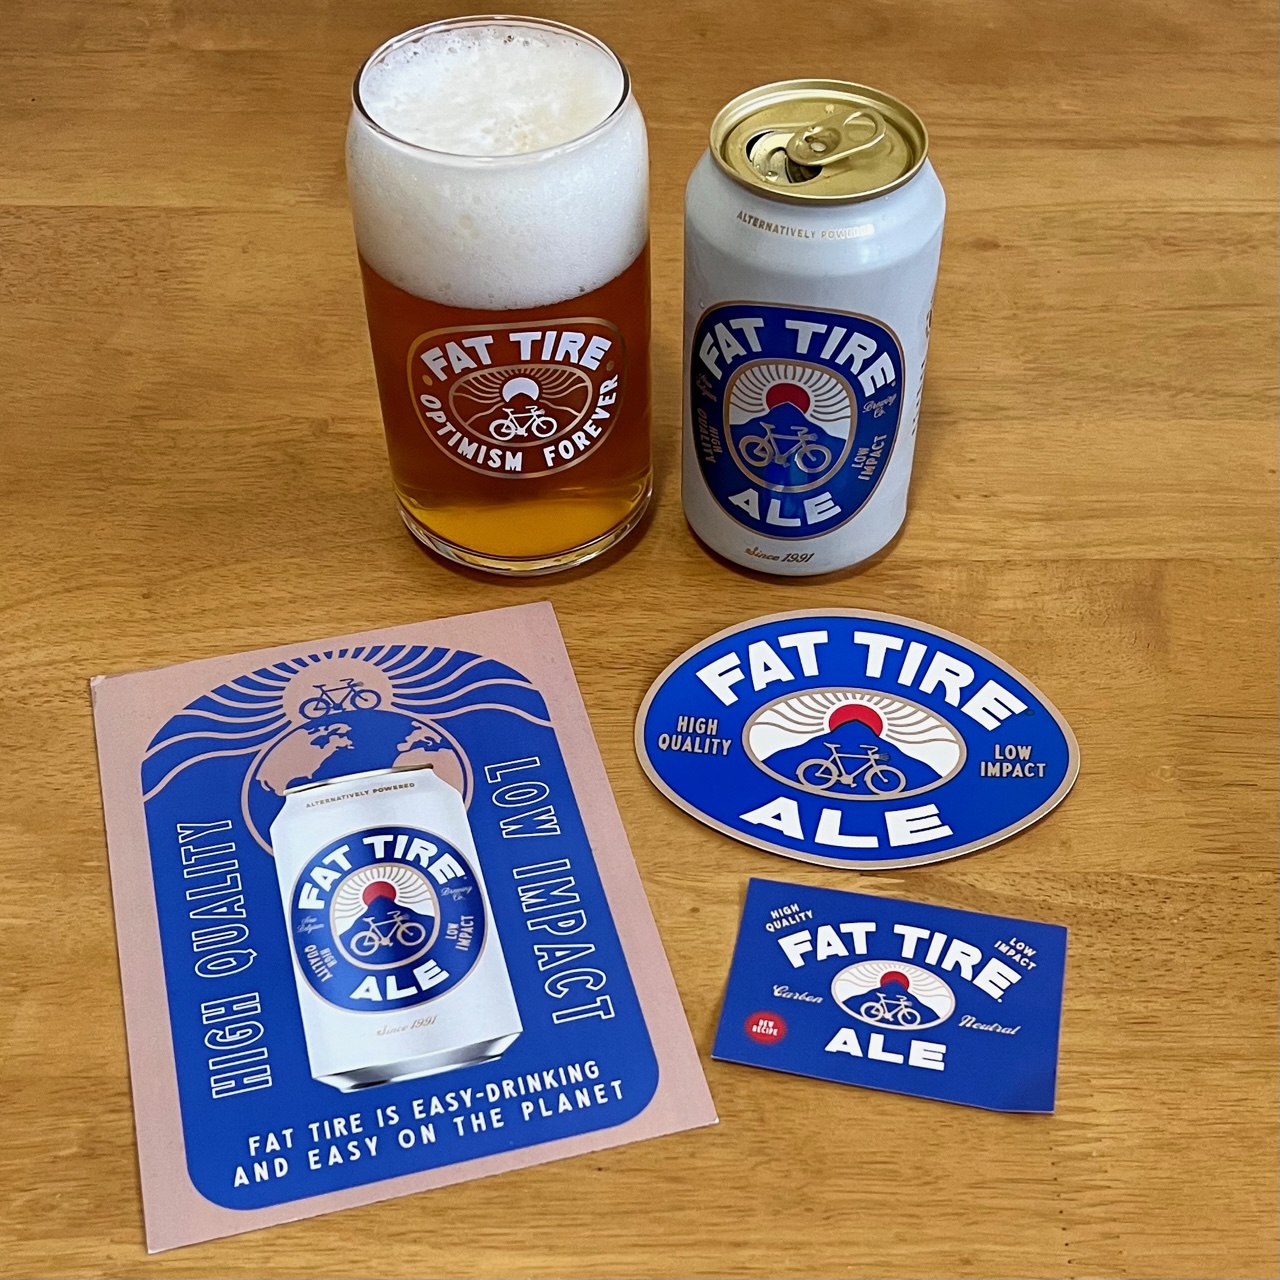 New Belgium has revamped its iconic Fat Tire with the newly released Fat Tire Ale.